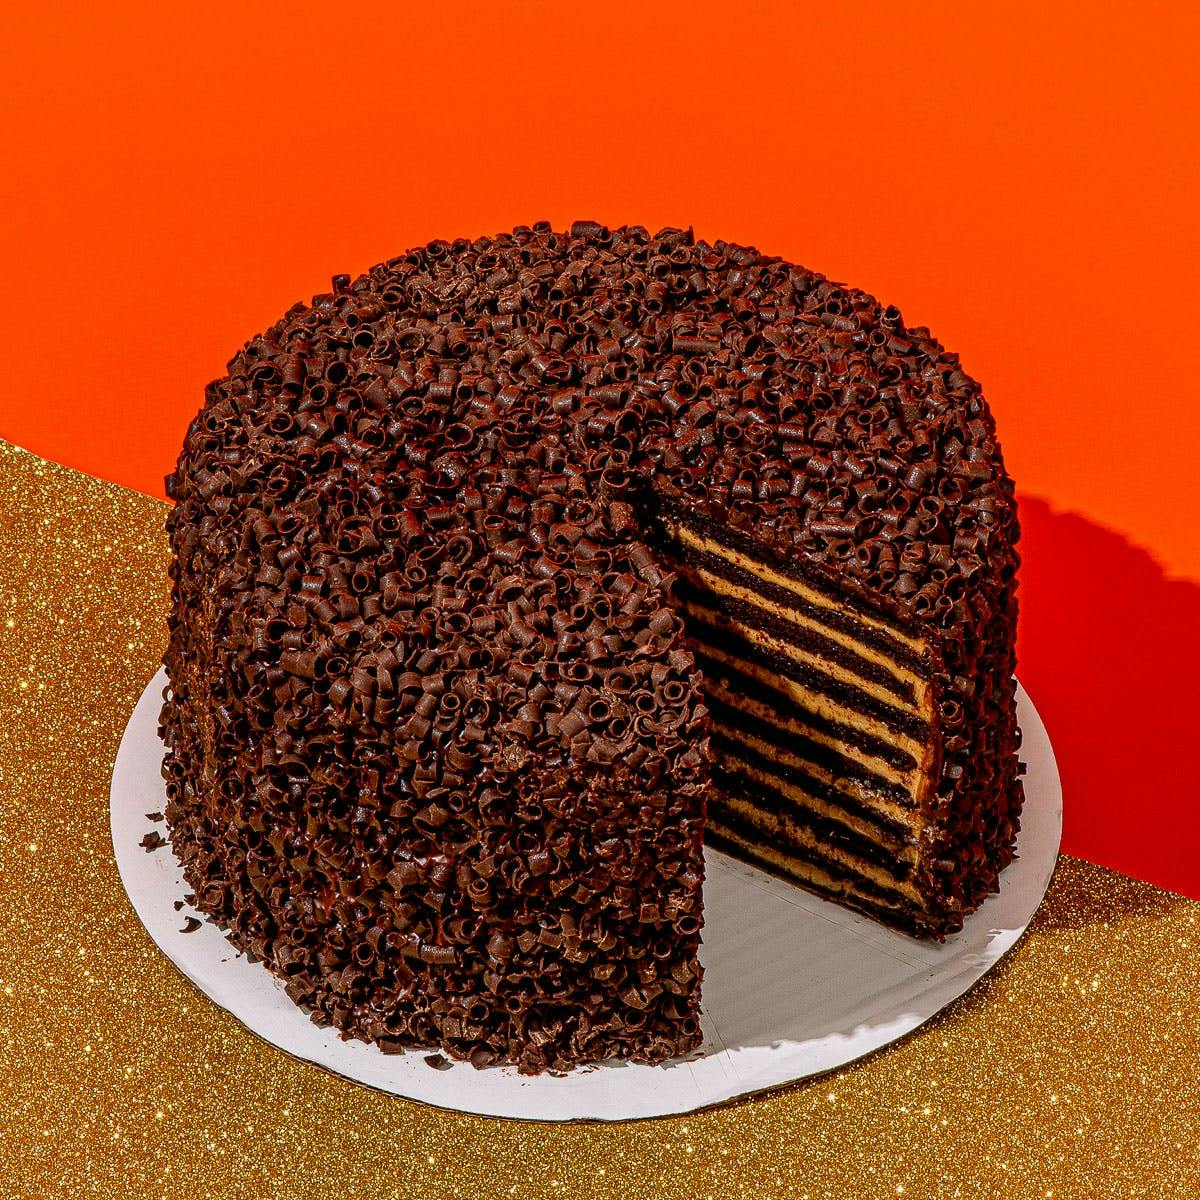 How to make a layer cake | Gourmet Traveller